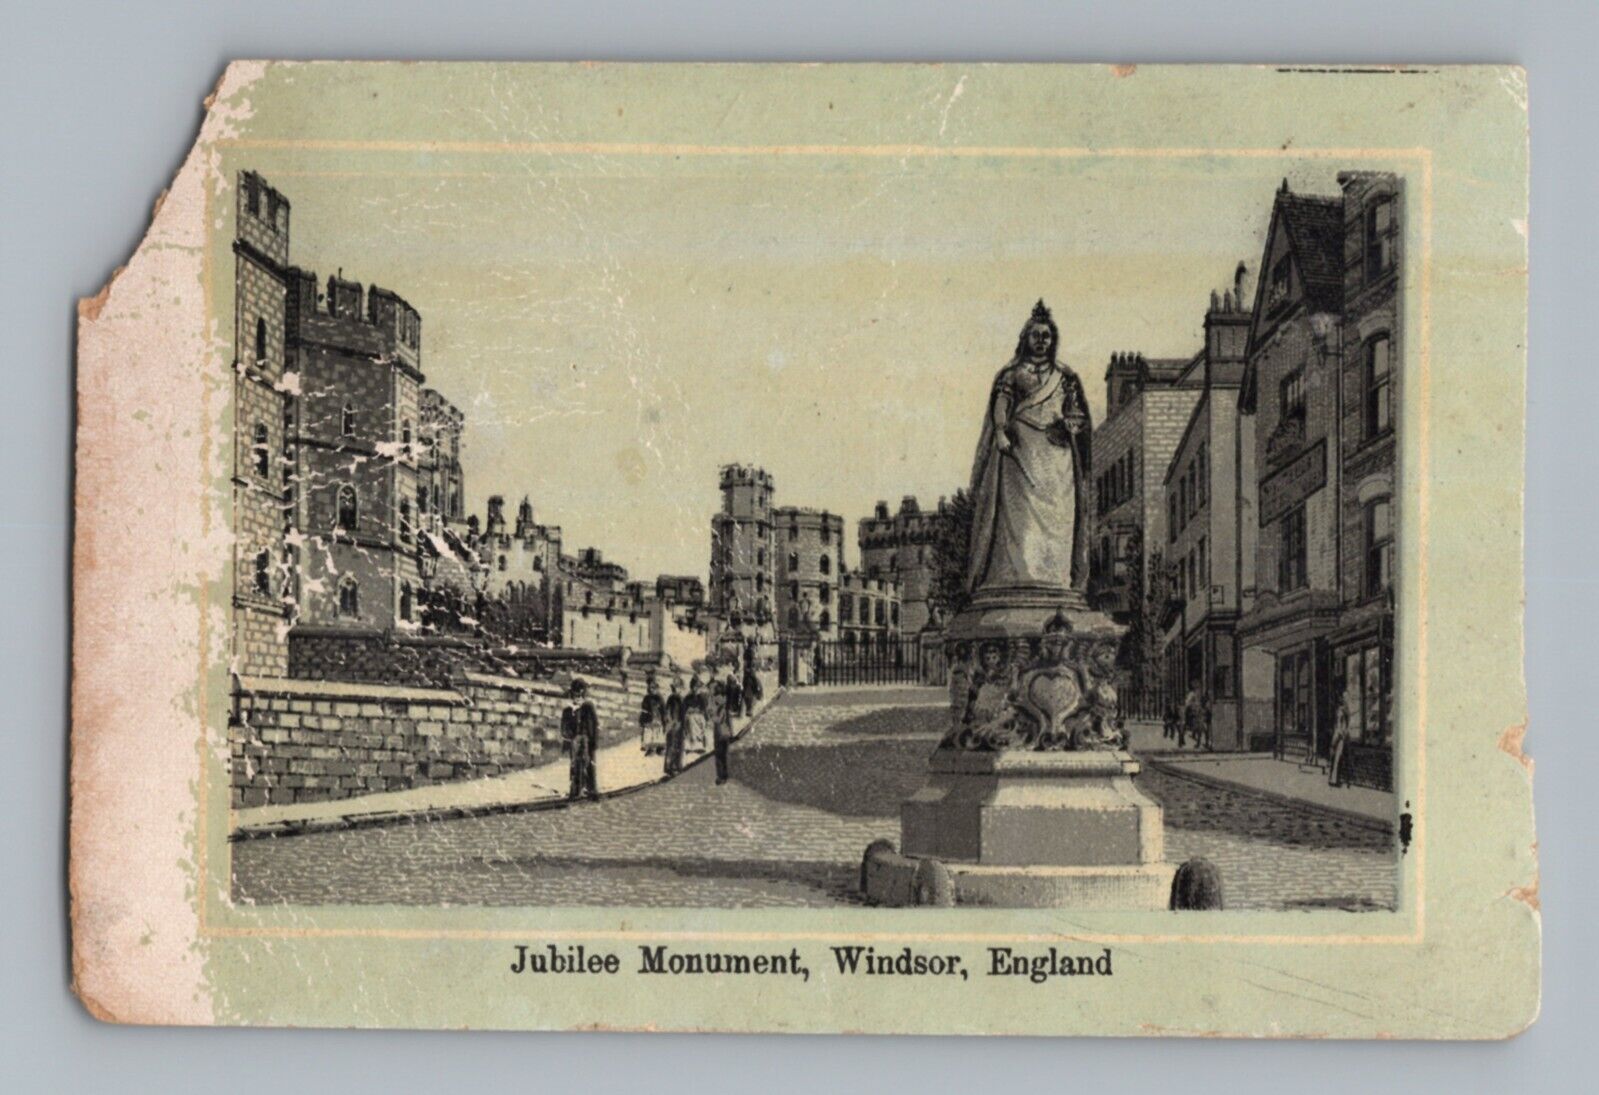 Jersey Coffee Jubilee Monument Windsor England Victorian Trade Card